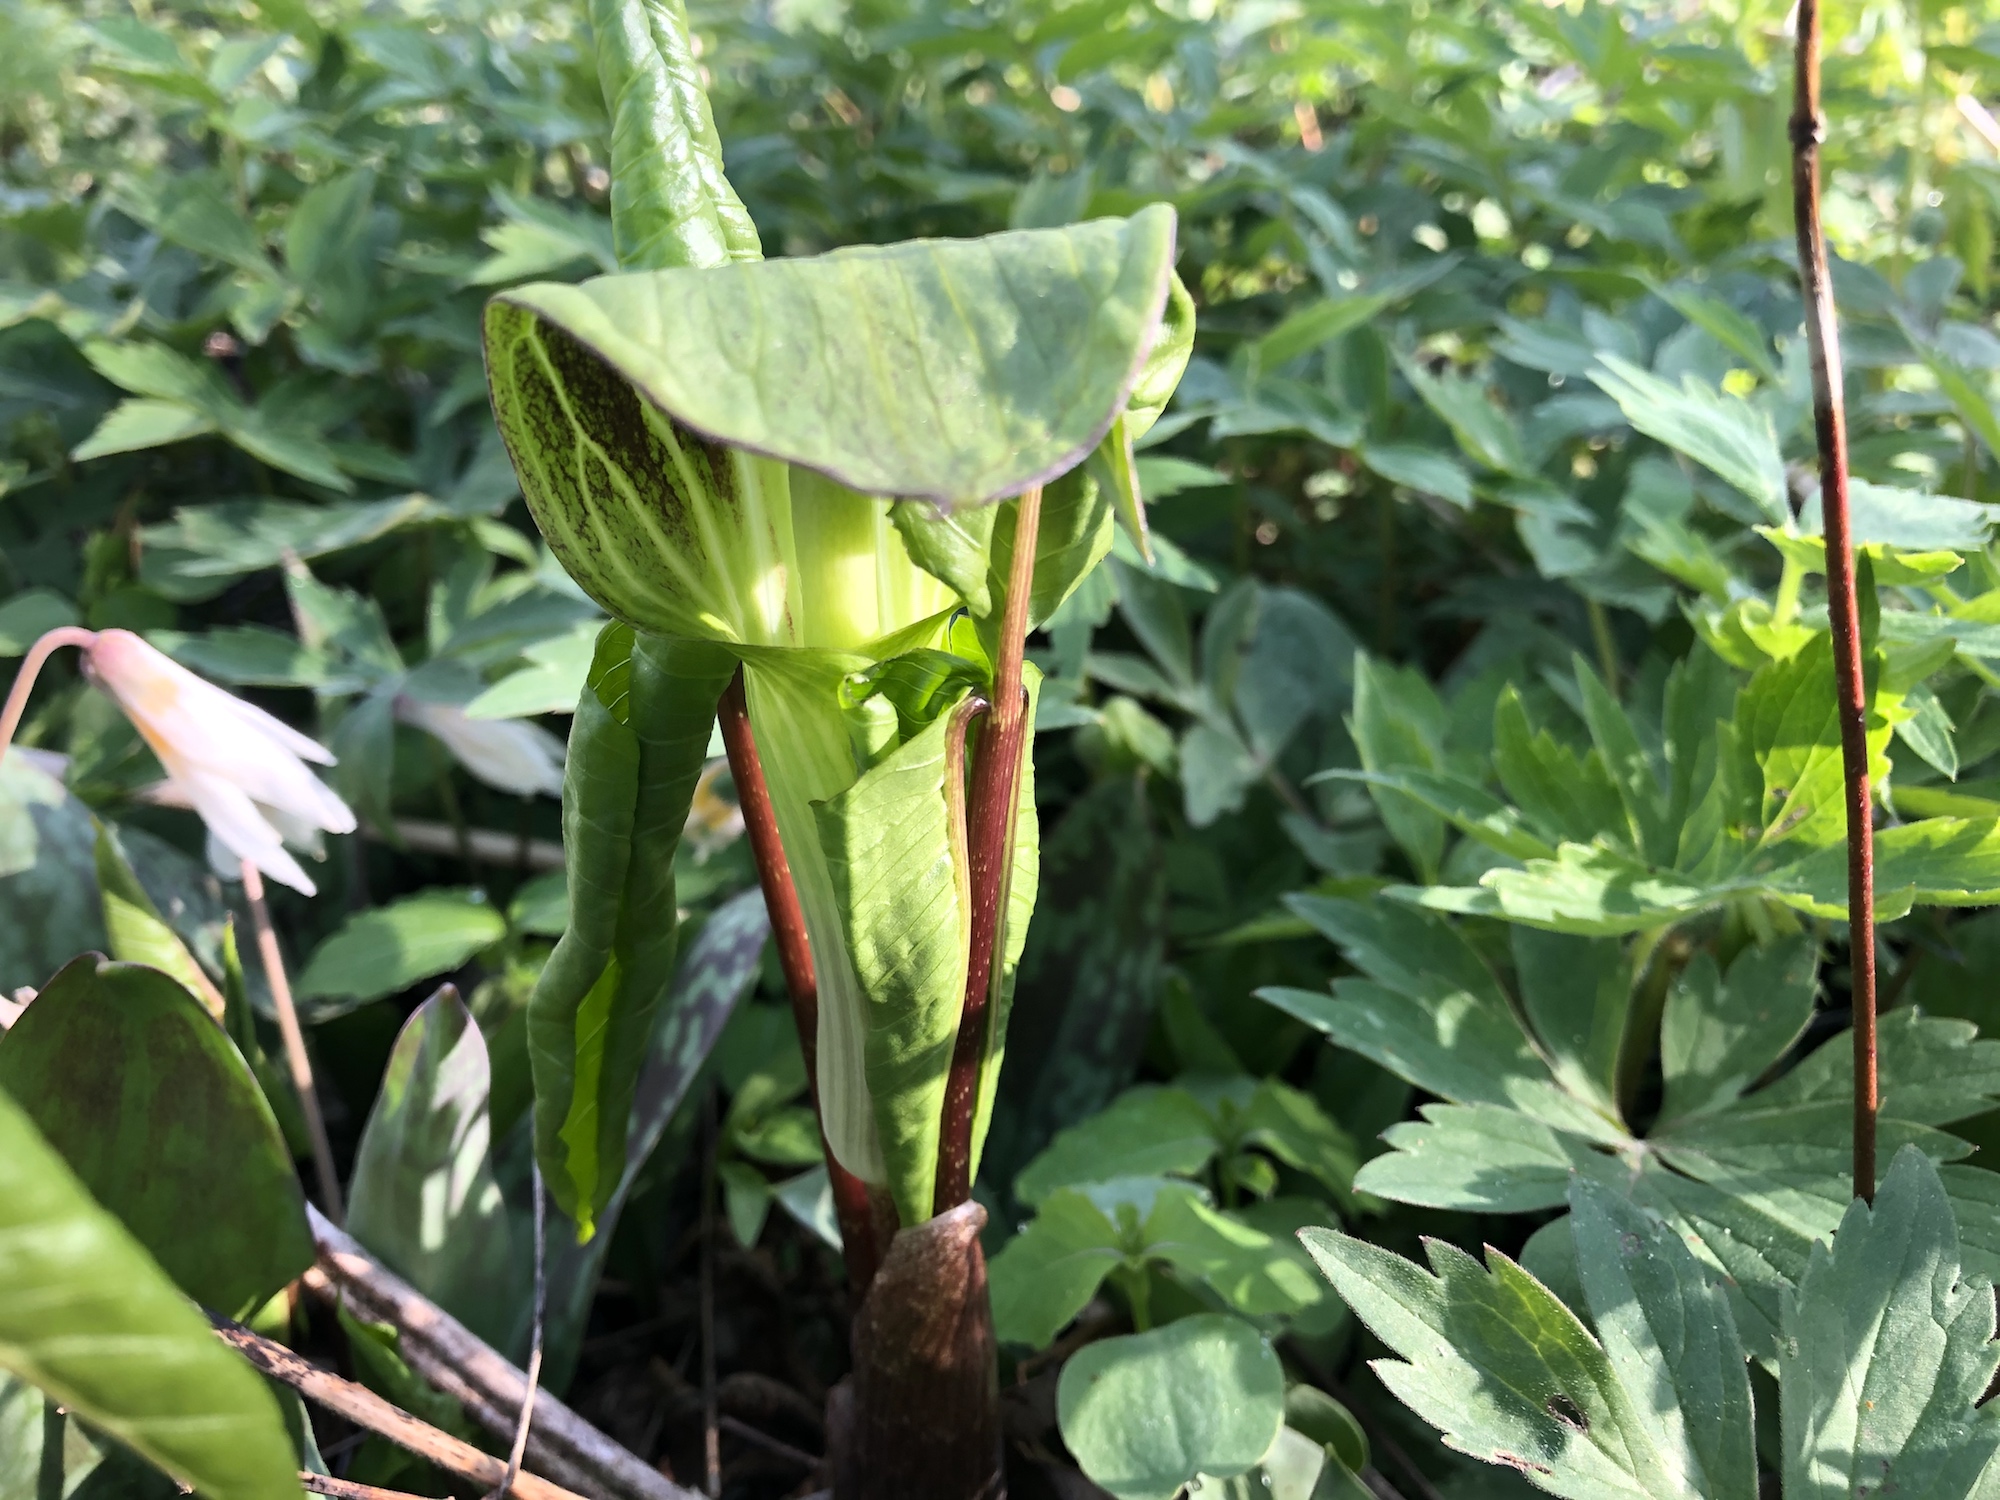 Jack-in-the-pulpit in the Oak Savanna on May 3, 2020 in Madison, Wisconsin.